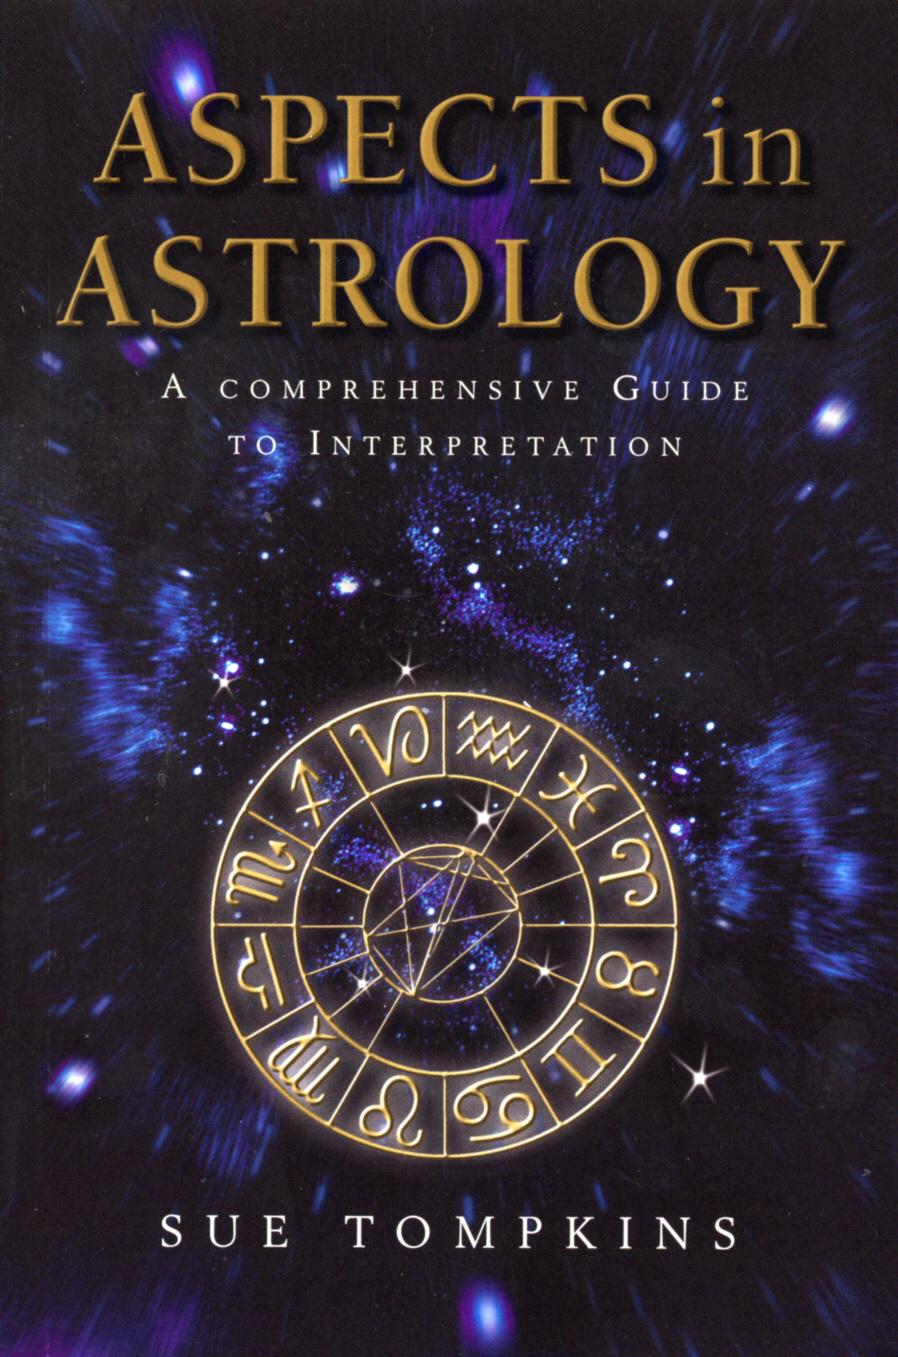 Aspects In Astrology - Sue Tompkins